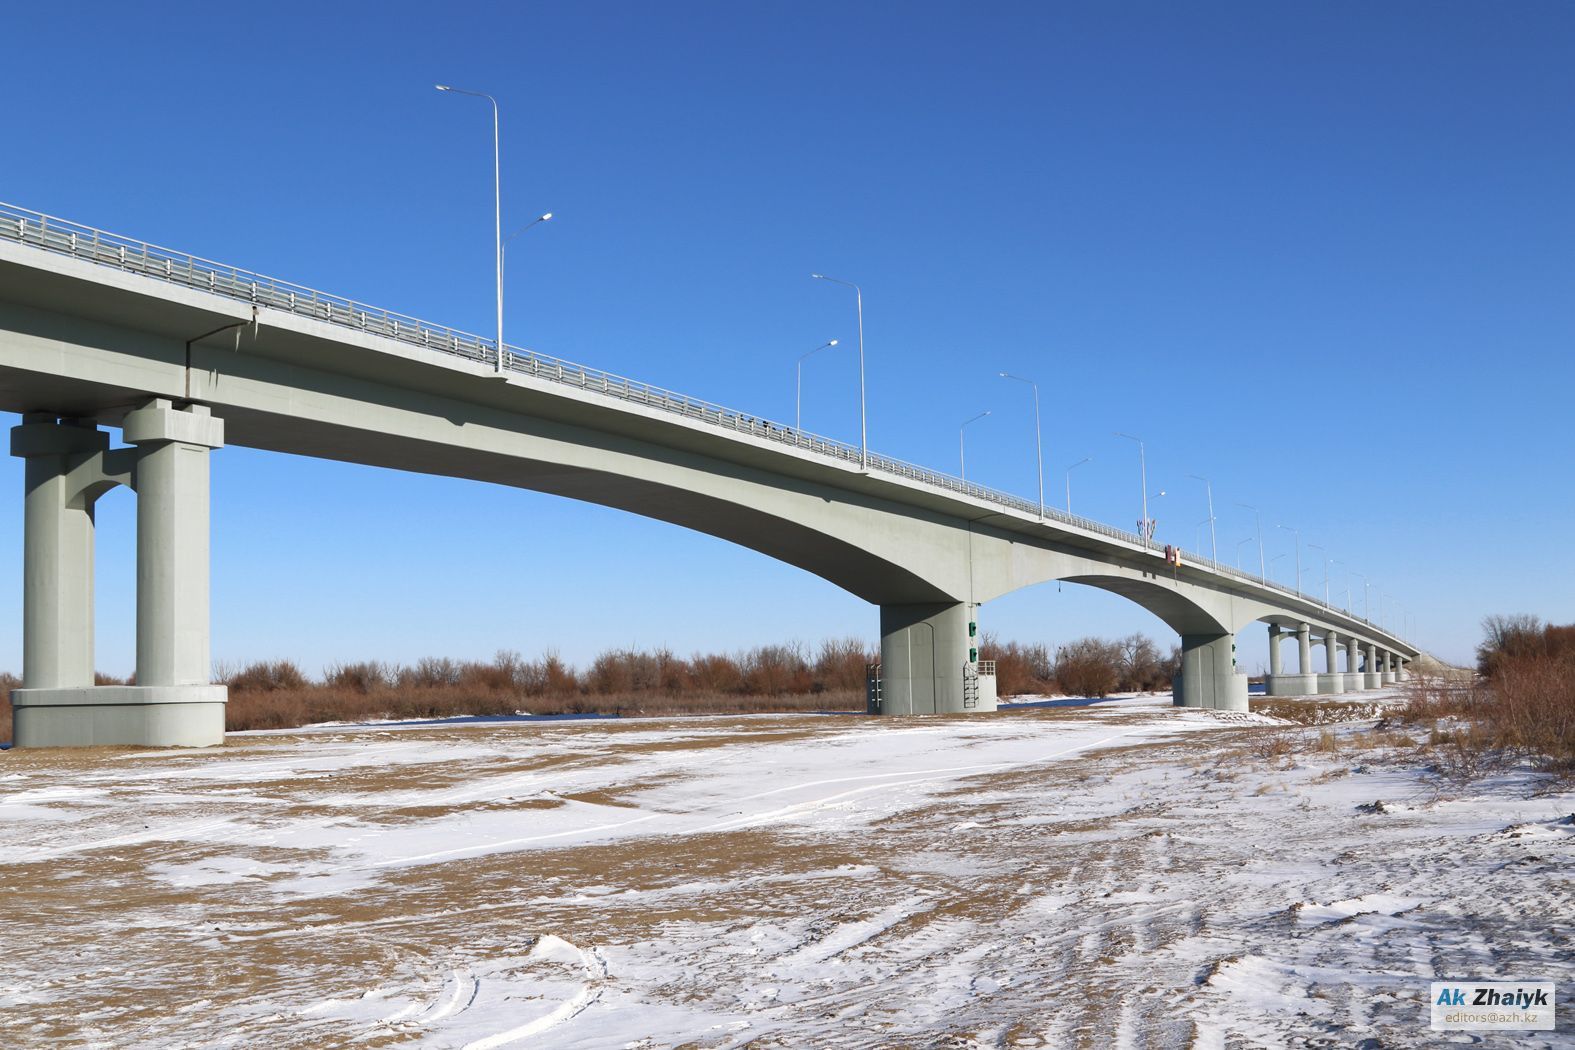 A NEW BRIDGE OPENED THROUGH THE URAL RIVER IN MAKHAMBET